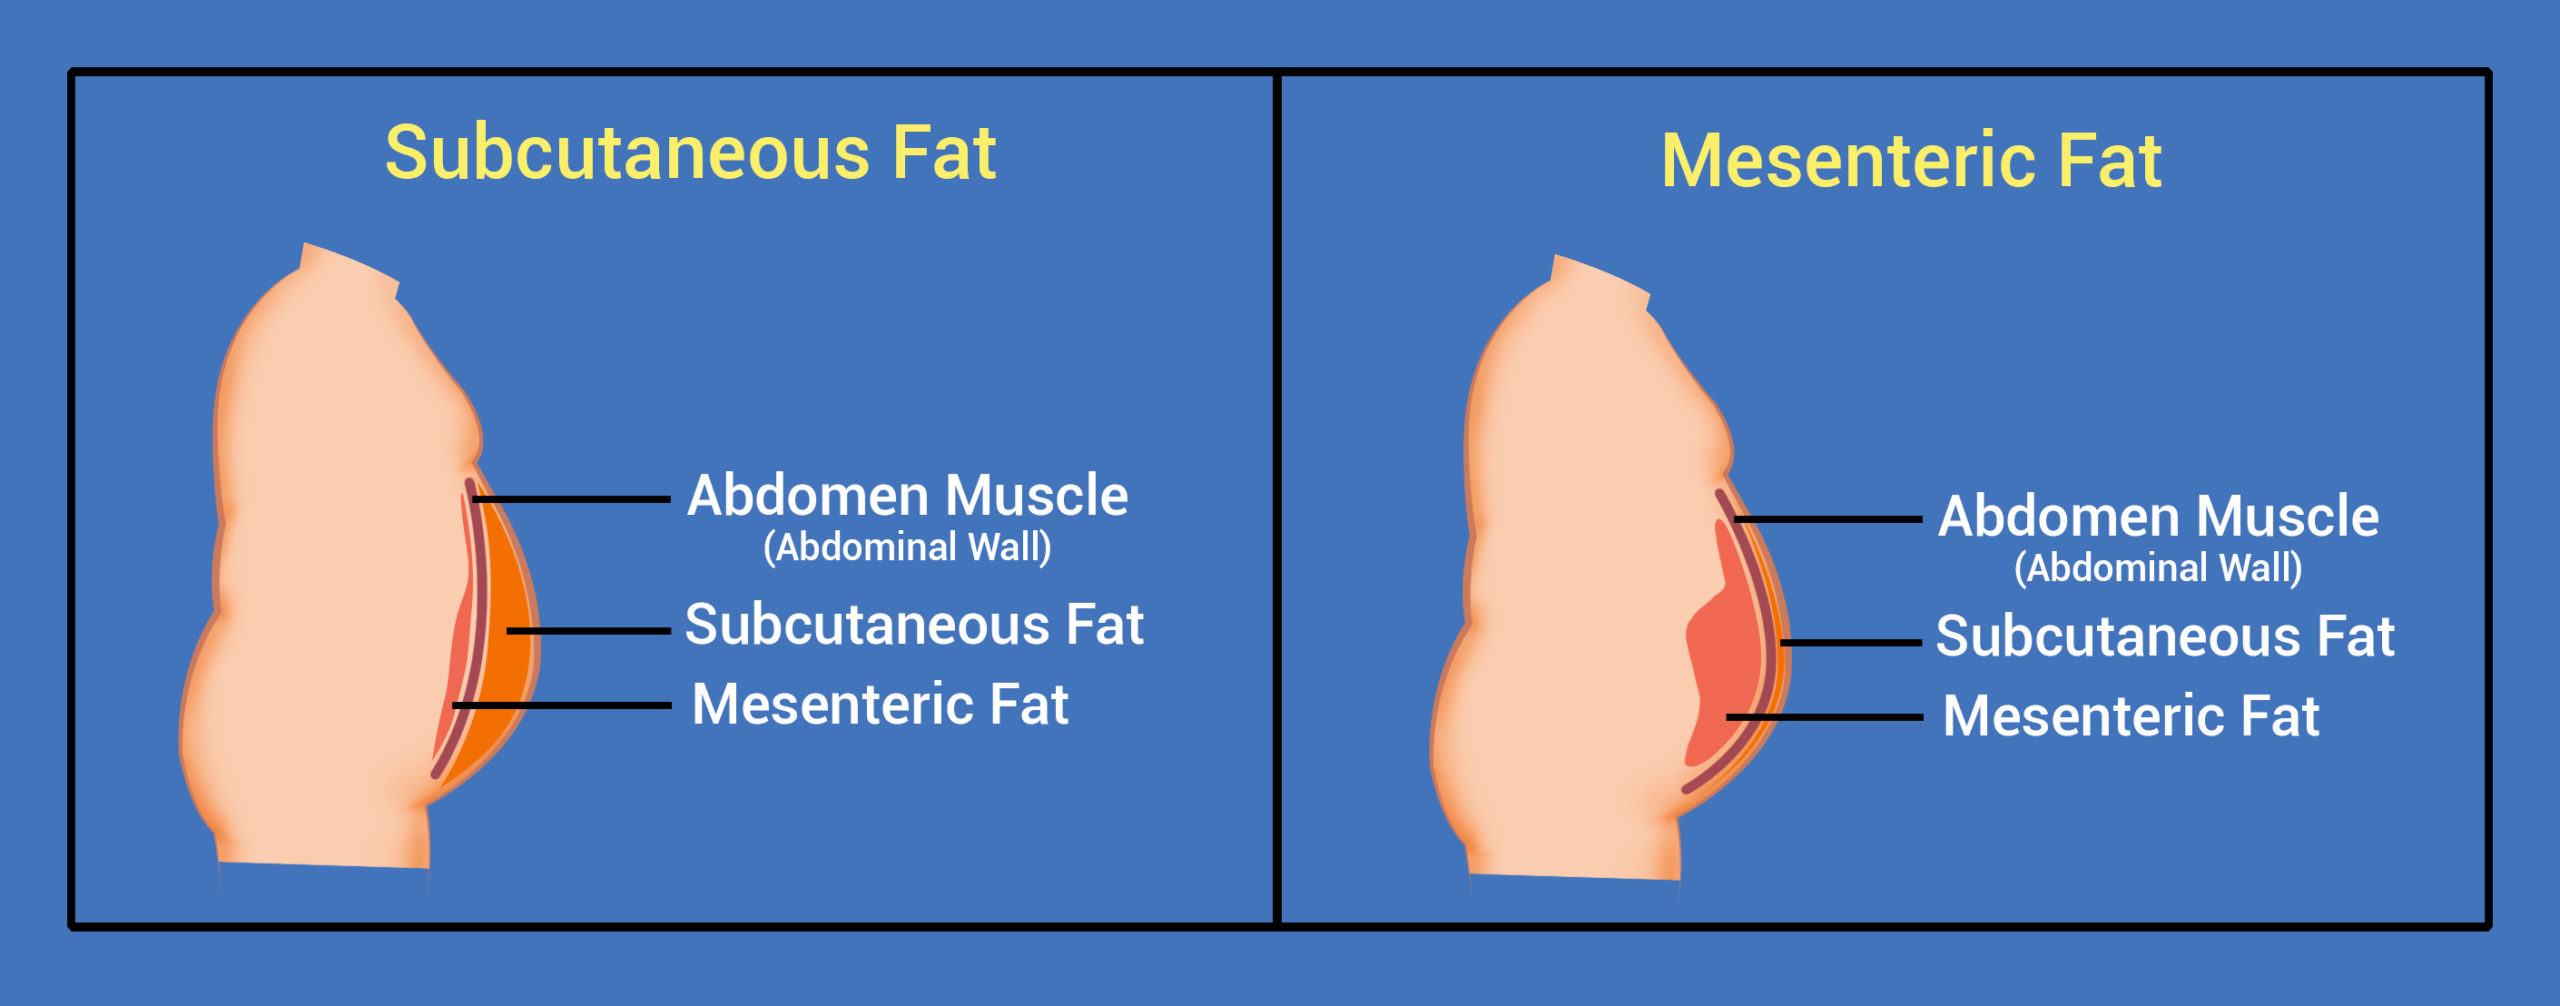 Subcutaneous fat and weight management